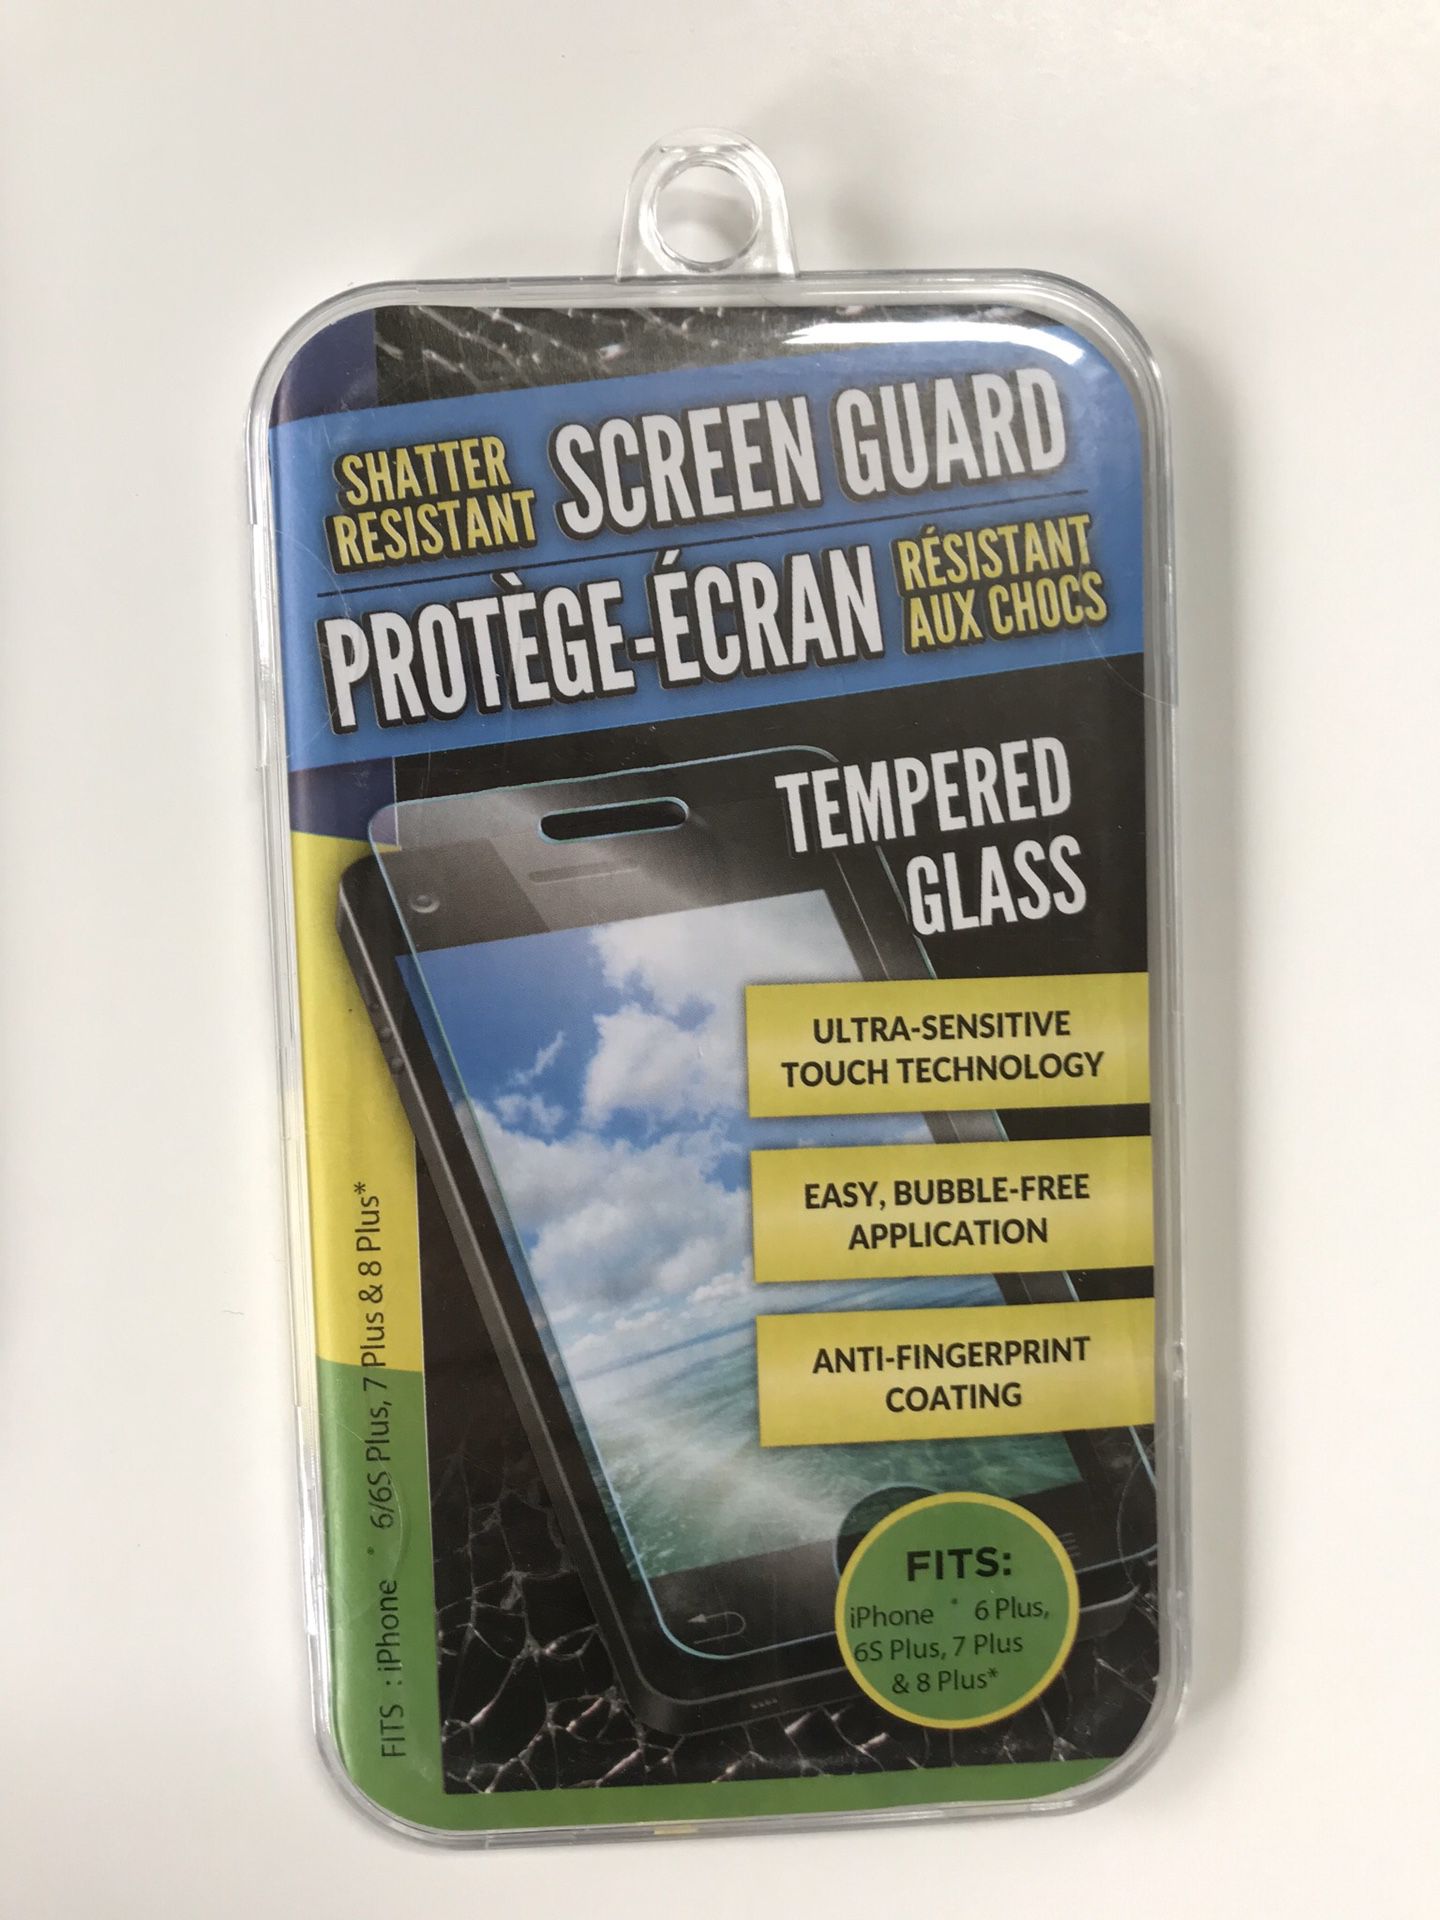 Screen Guard Shatter Resistant